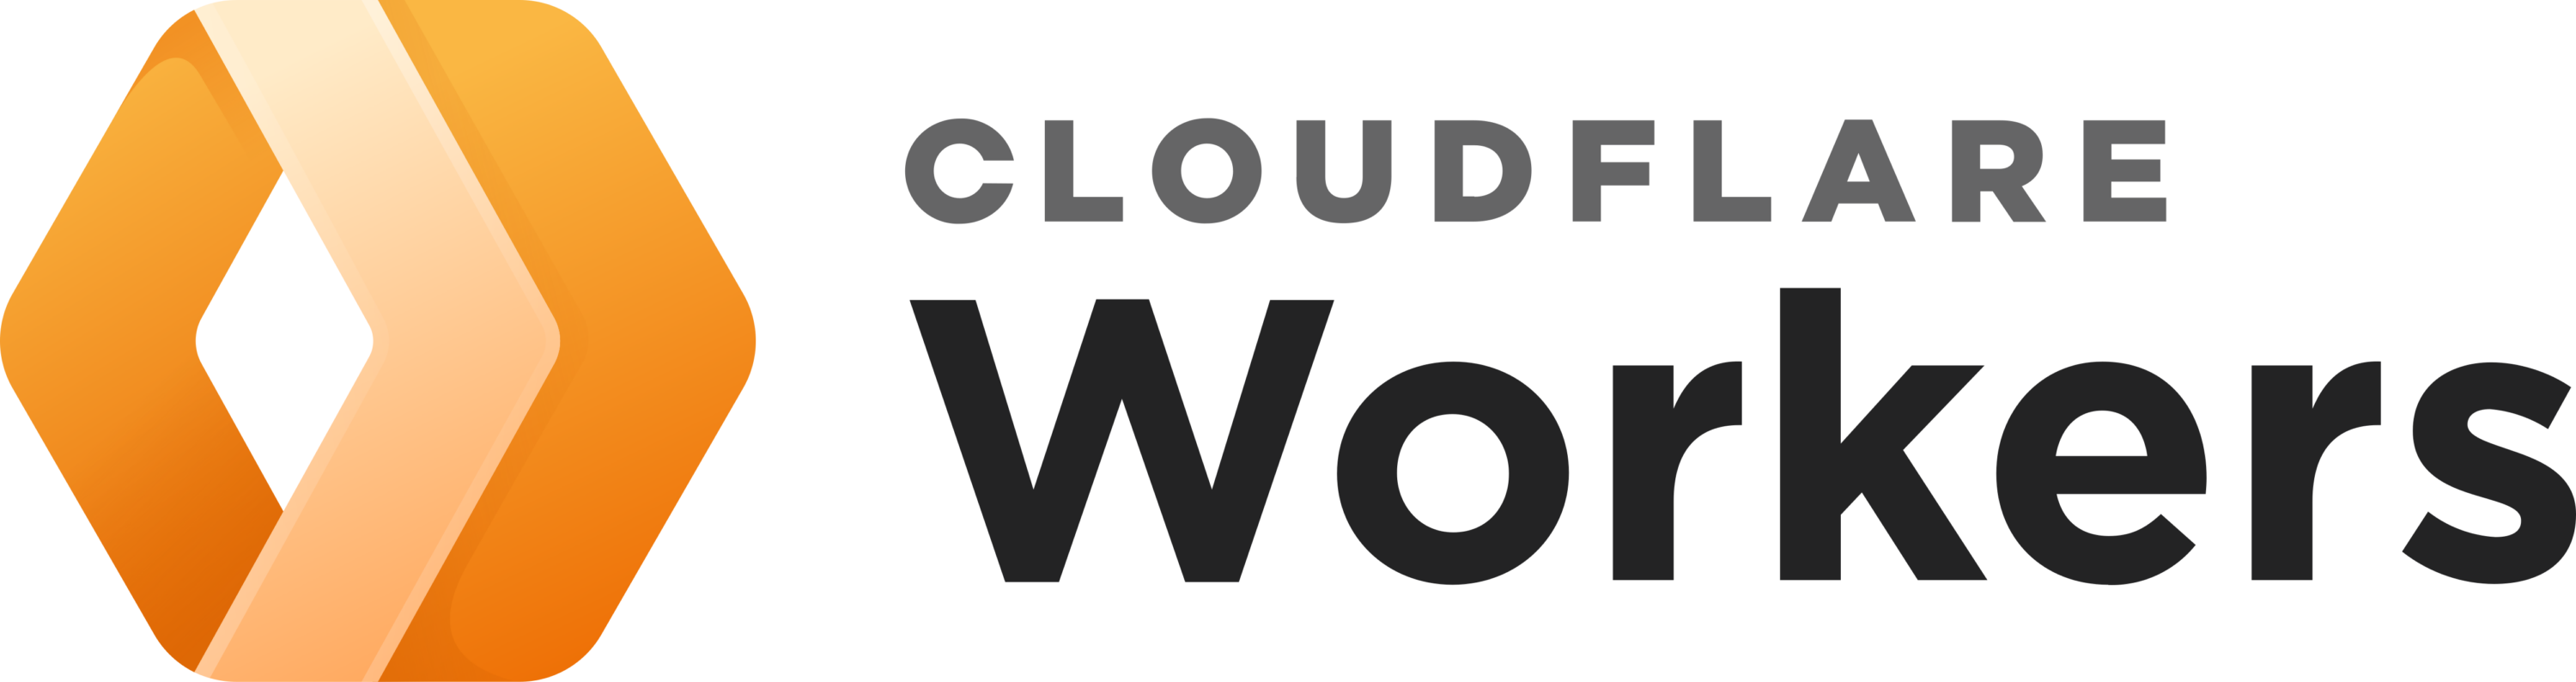 Cloudflare Workers Logo